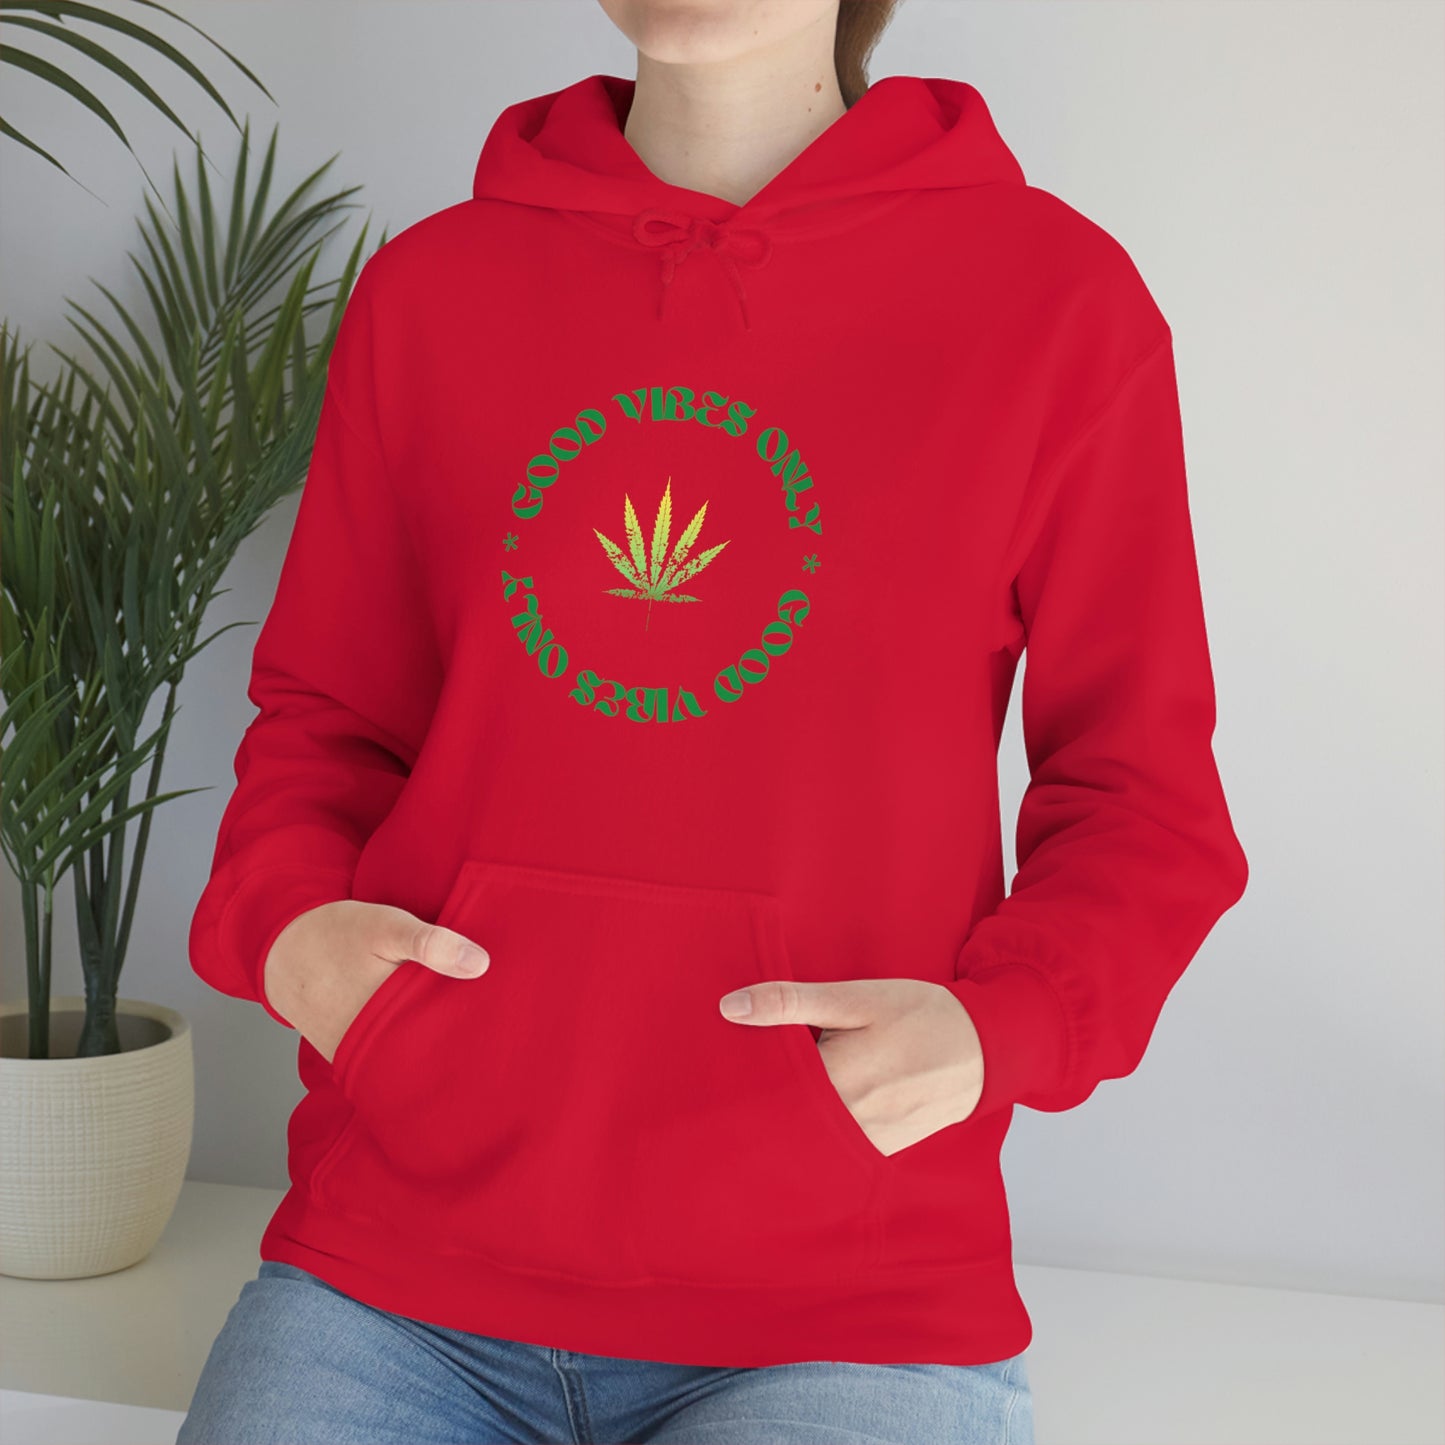 A woman wearing a red Good Vibes Only Weed Sweater.